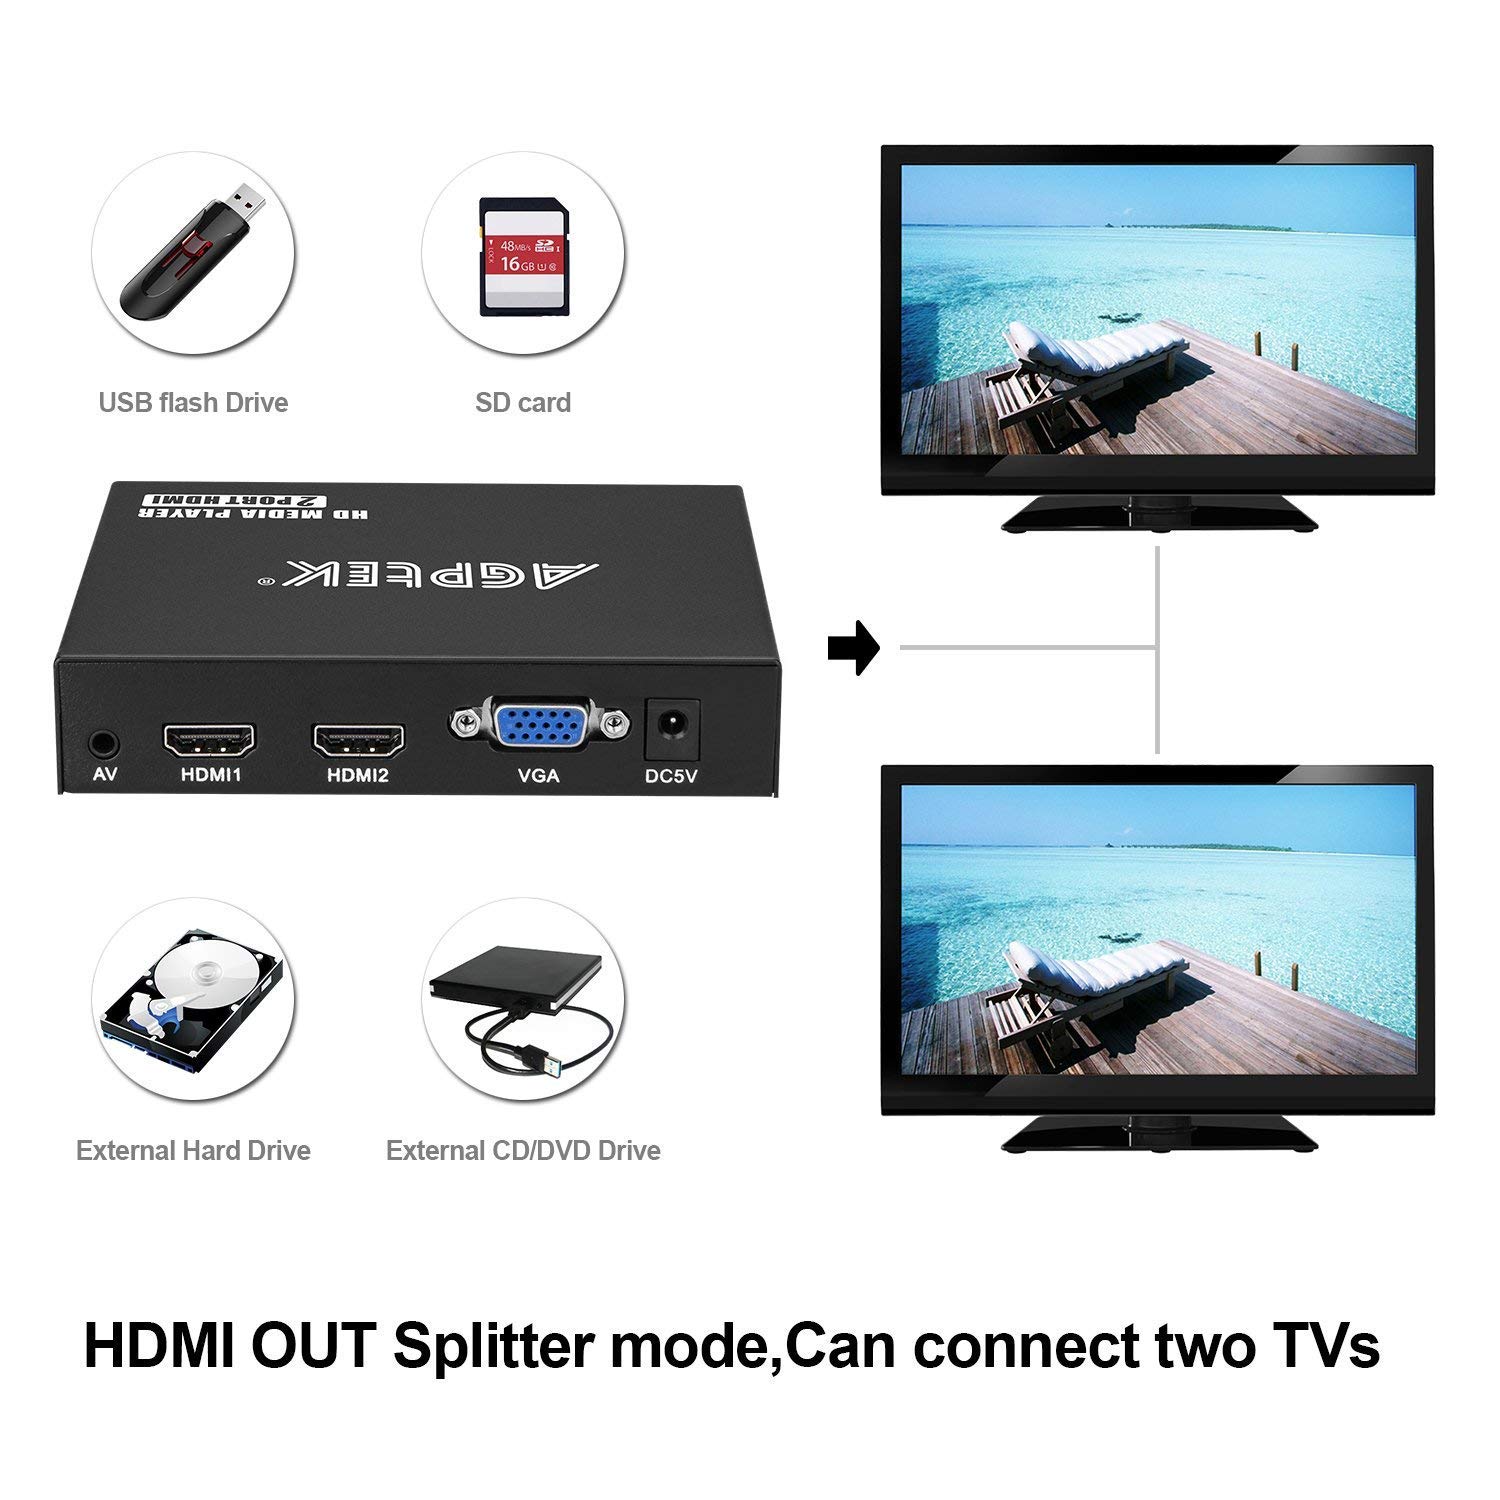 1080P Media Player with ONE AV Cable, Dual HDMI Outpus, Portable MP4 Player for Video/Photo/Music Support USB Drive/SD Card/HDD - HDMI/AV/VGA Output …